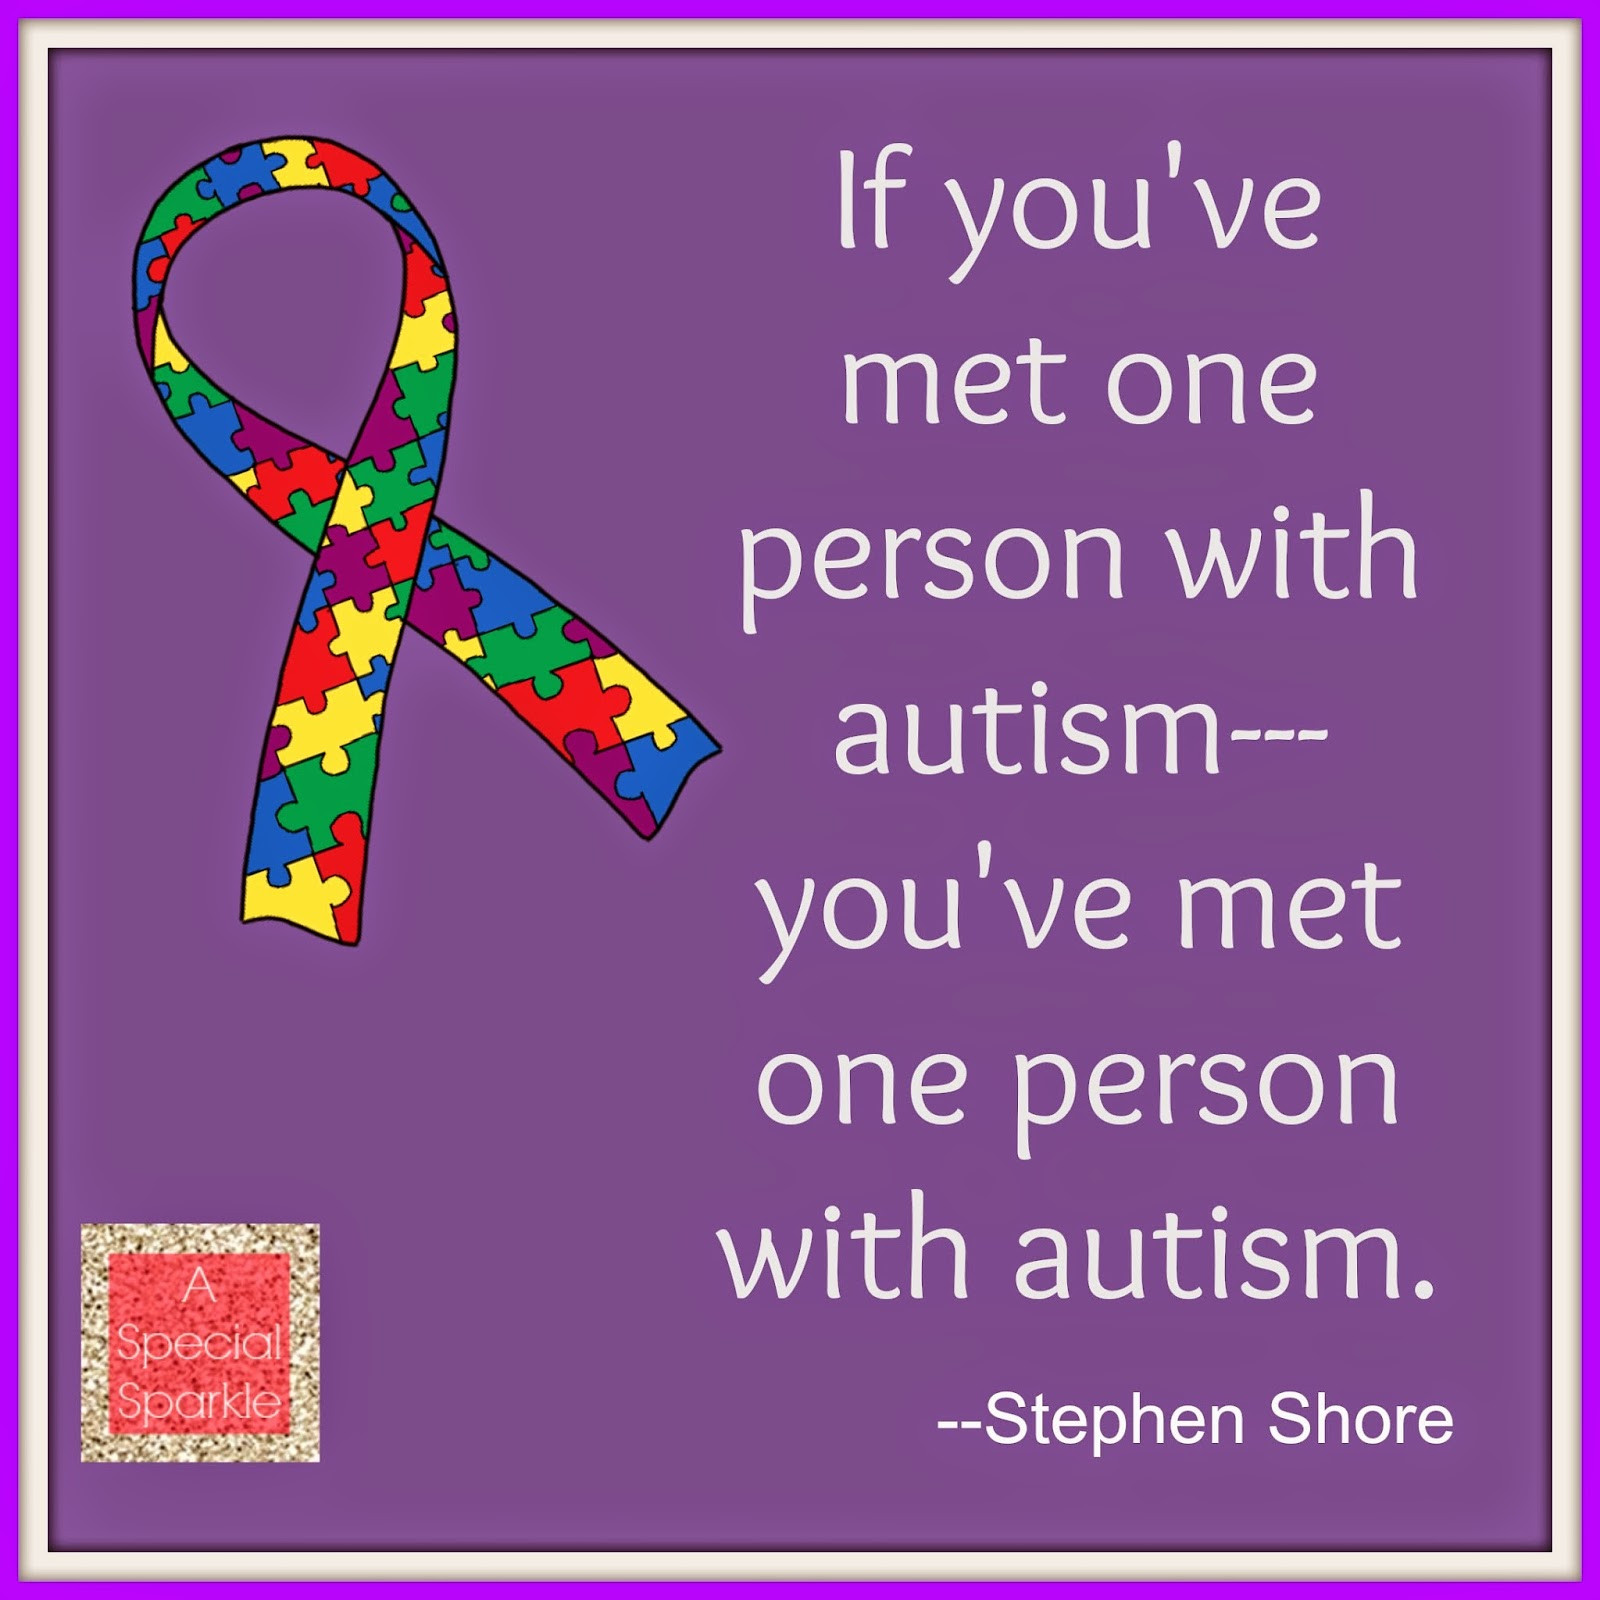 Funny Autism Quotes
 Funny Quotes About Autism QuotesGram